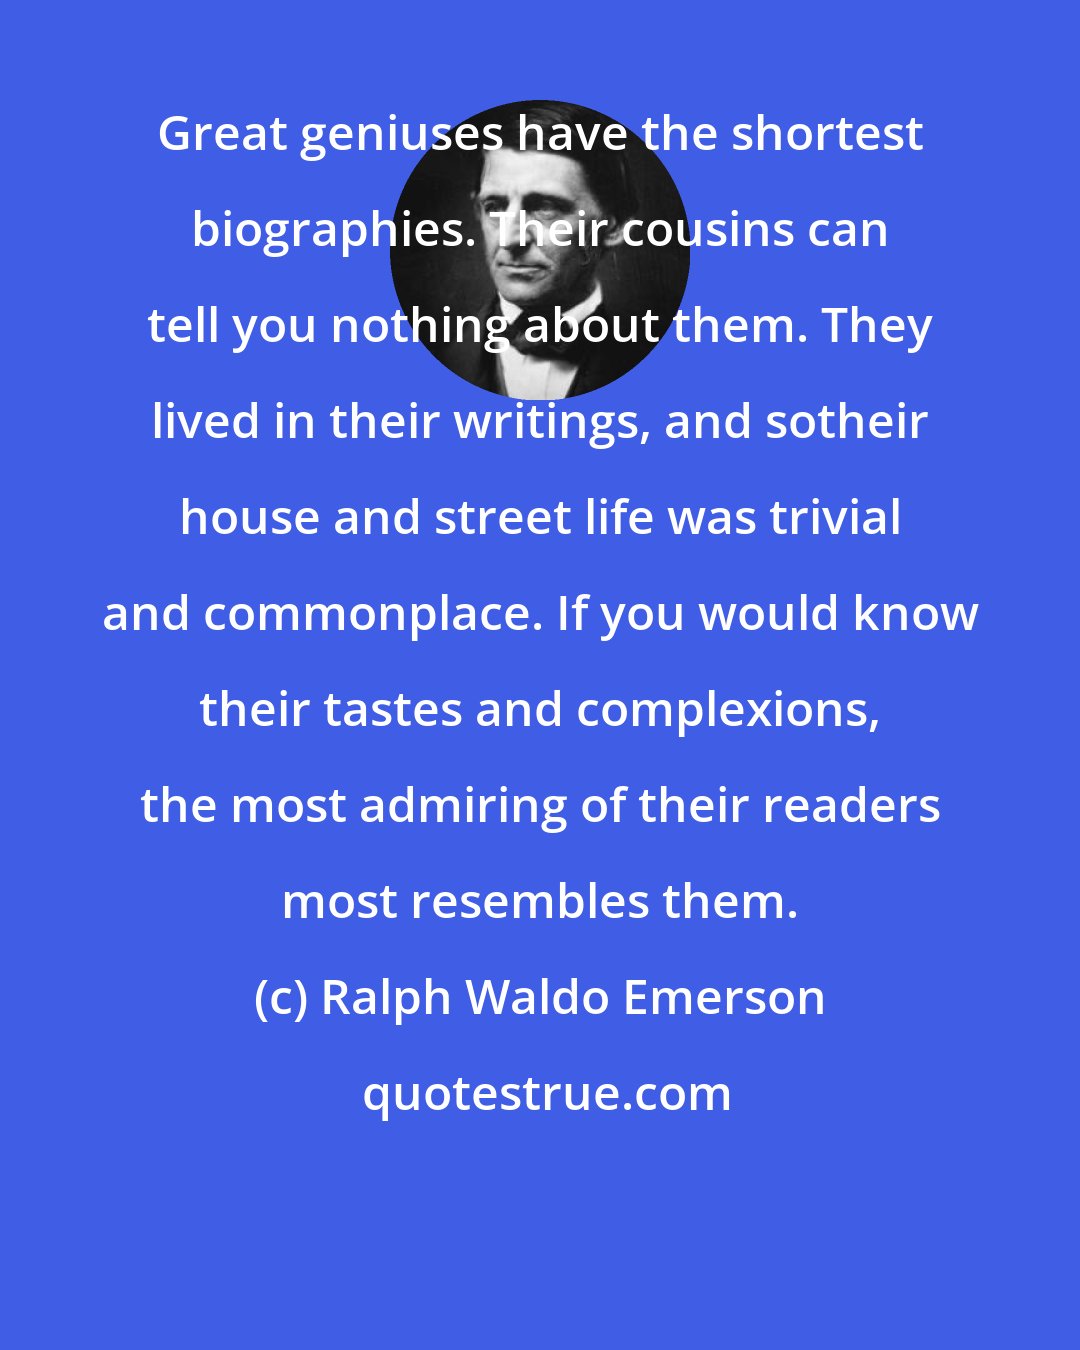 Ralph Waldo Emerson: Great geniuses have the shortest biographies. Their cousins can tell you nothing about them. They lived in their writings, and sotheir house and street life was trivial and commonplace. If you would know their tastes and complexions, the most admiring of their readers most resembles them.